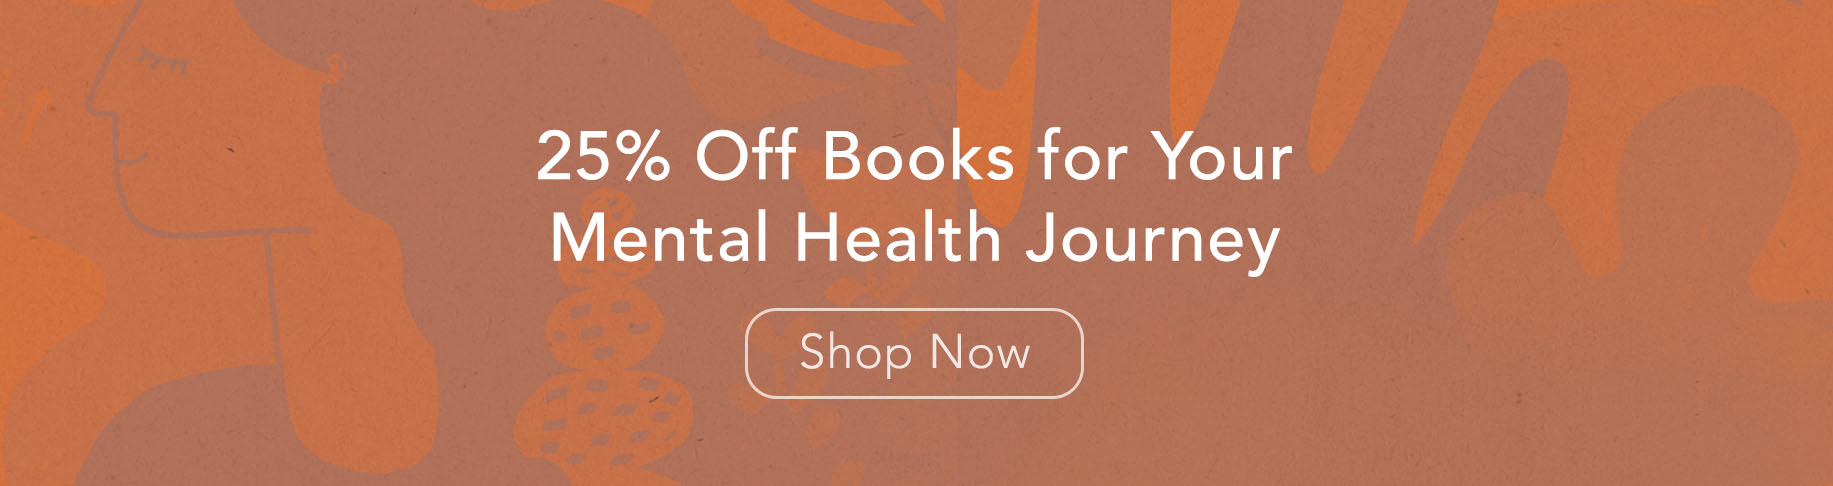 25% Off Books for Your Mental Health Journey - Shop Now